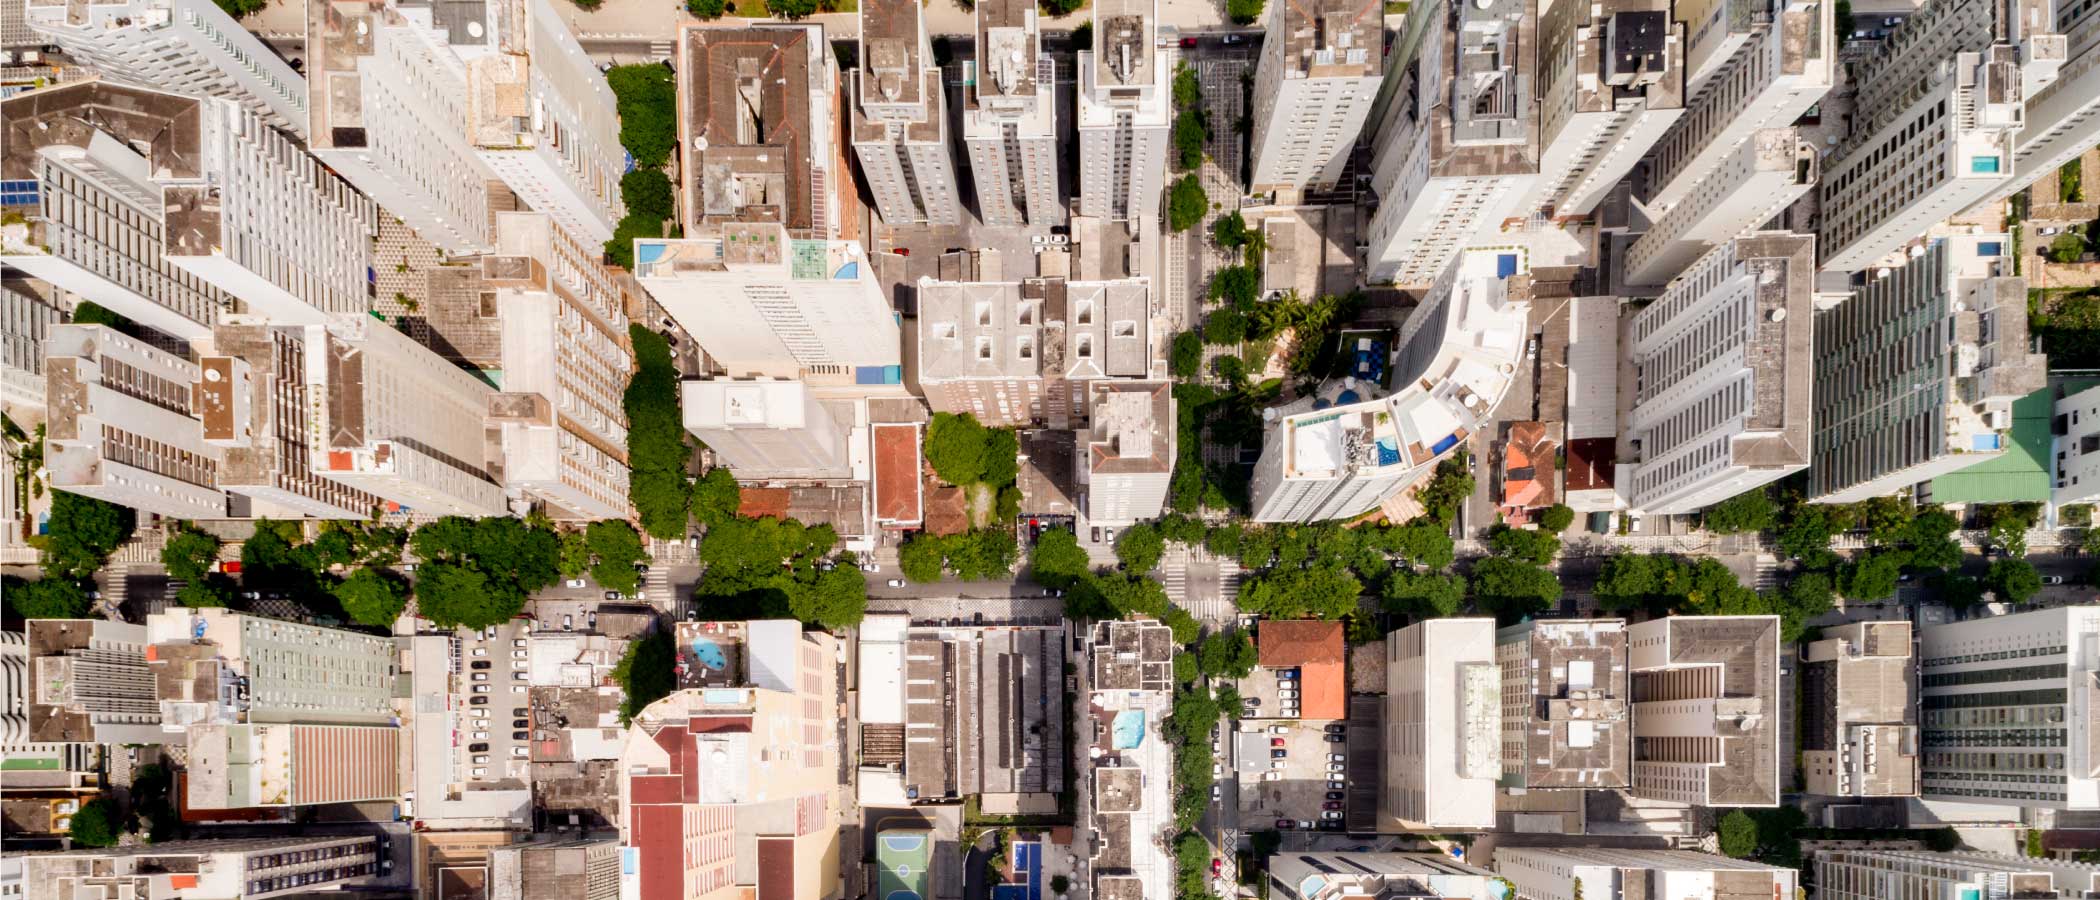 Aerial view of an urban residential neighborhood with apartment towers, courtyards, and open space.